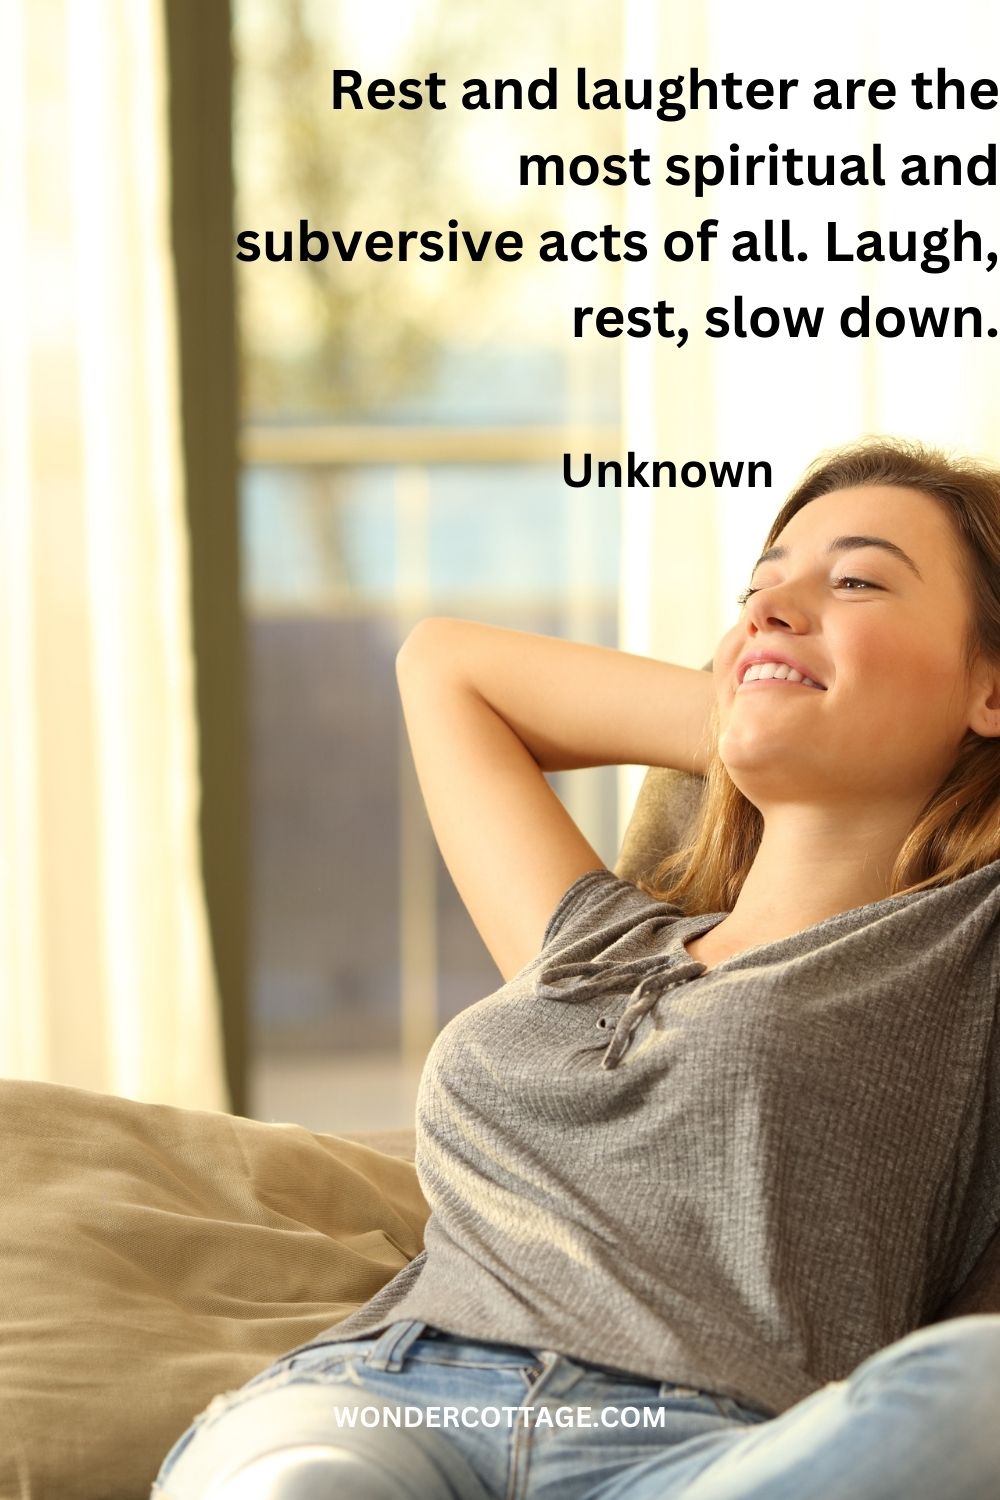 Rest and laughter are the most spiritual and subversive acts of all. Laugh, rest, slow down. Unknown